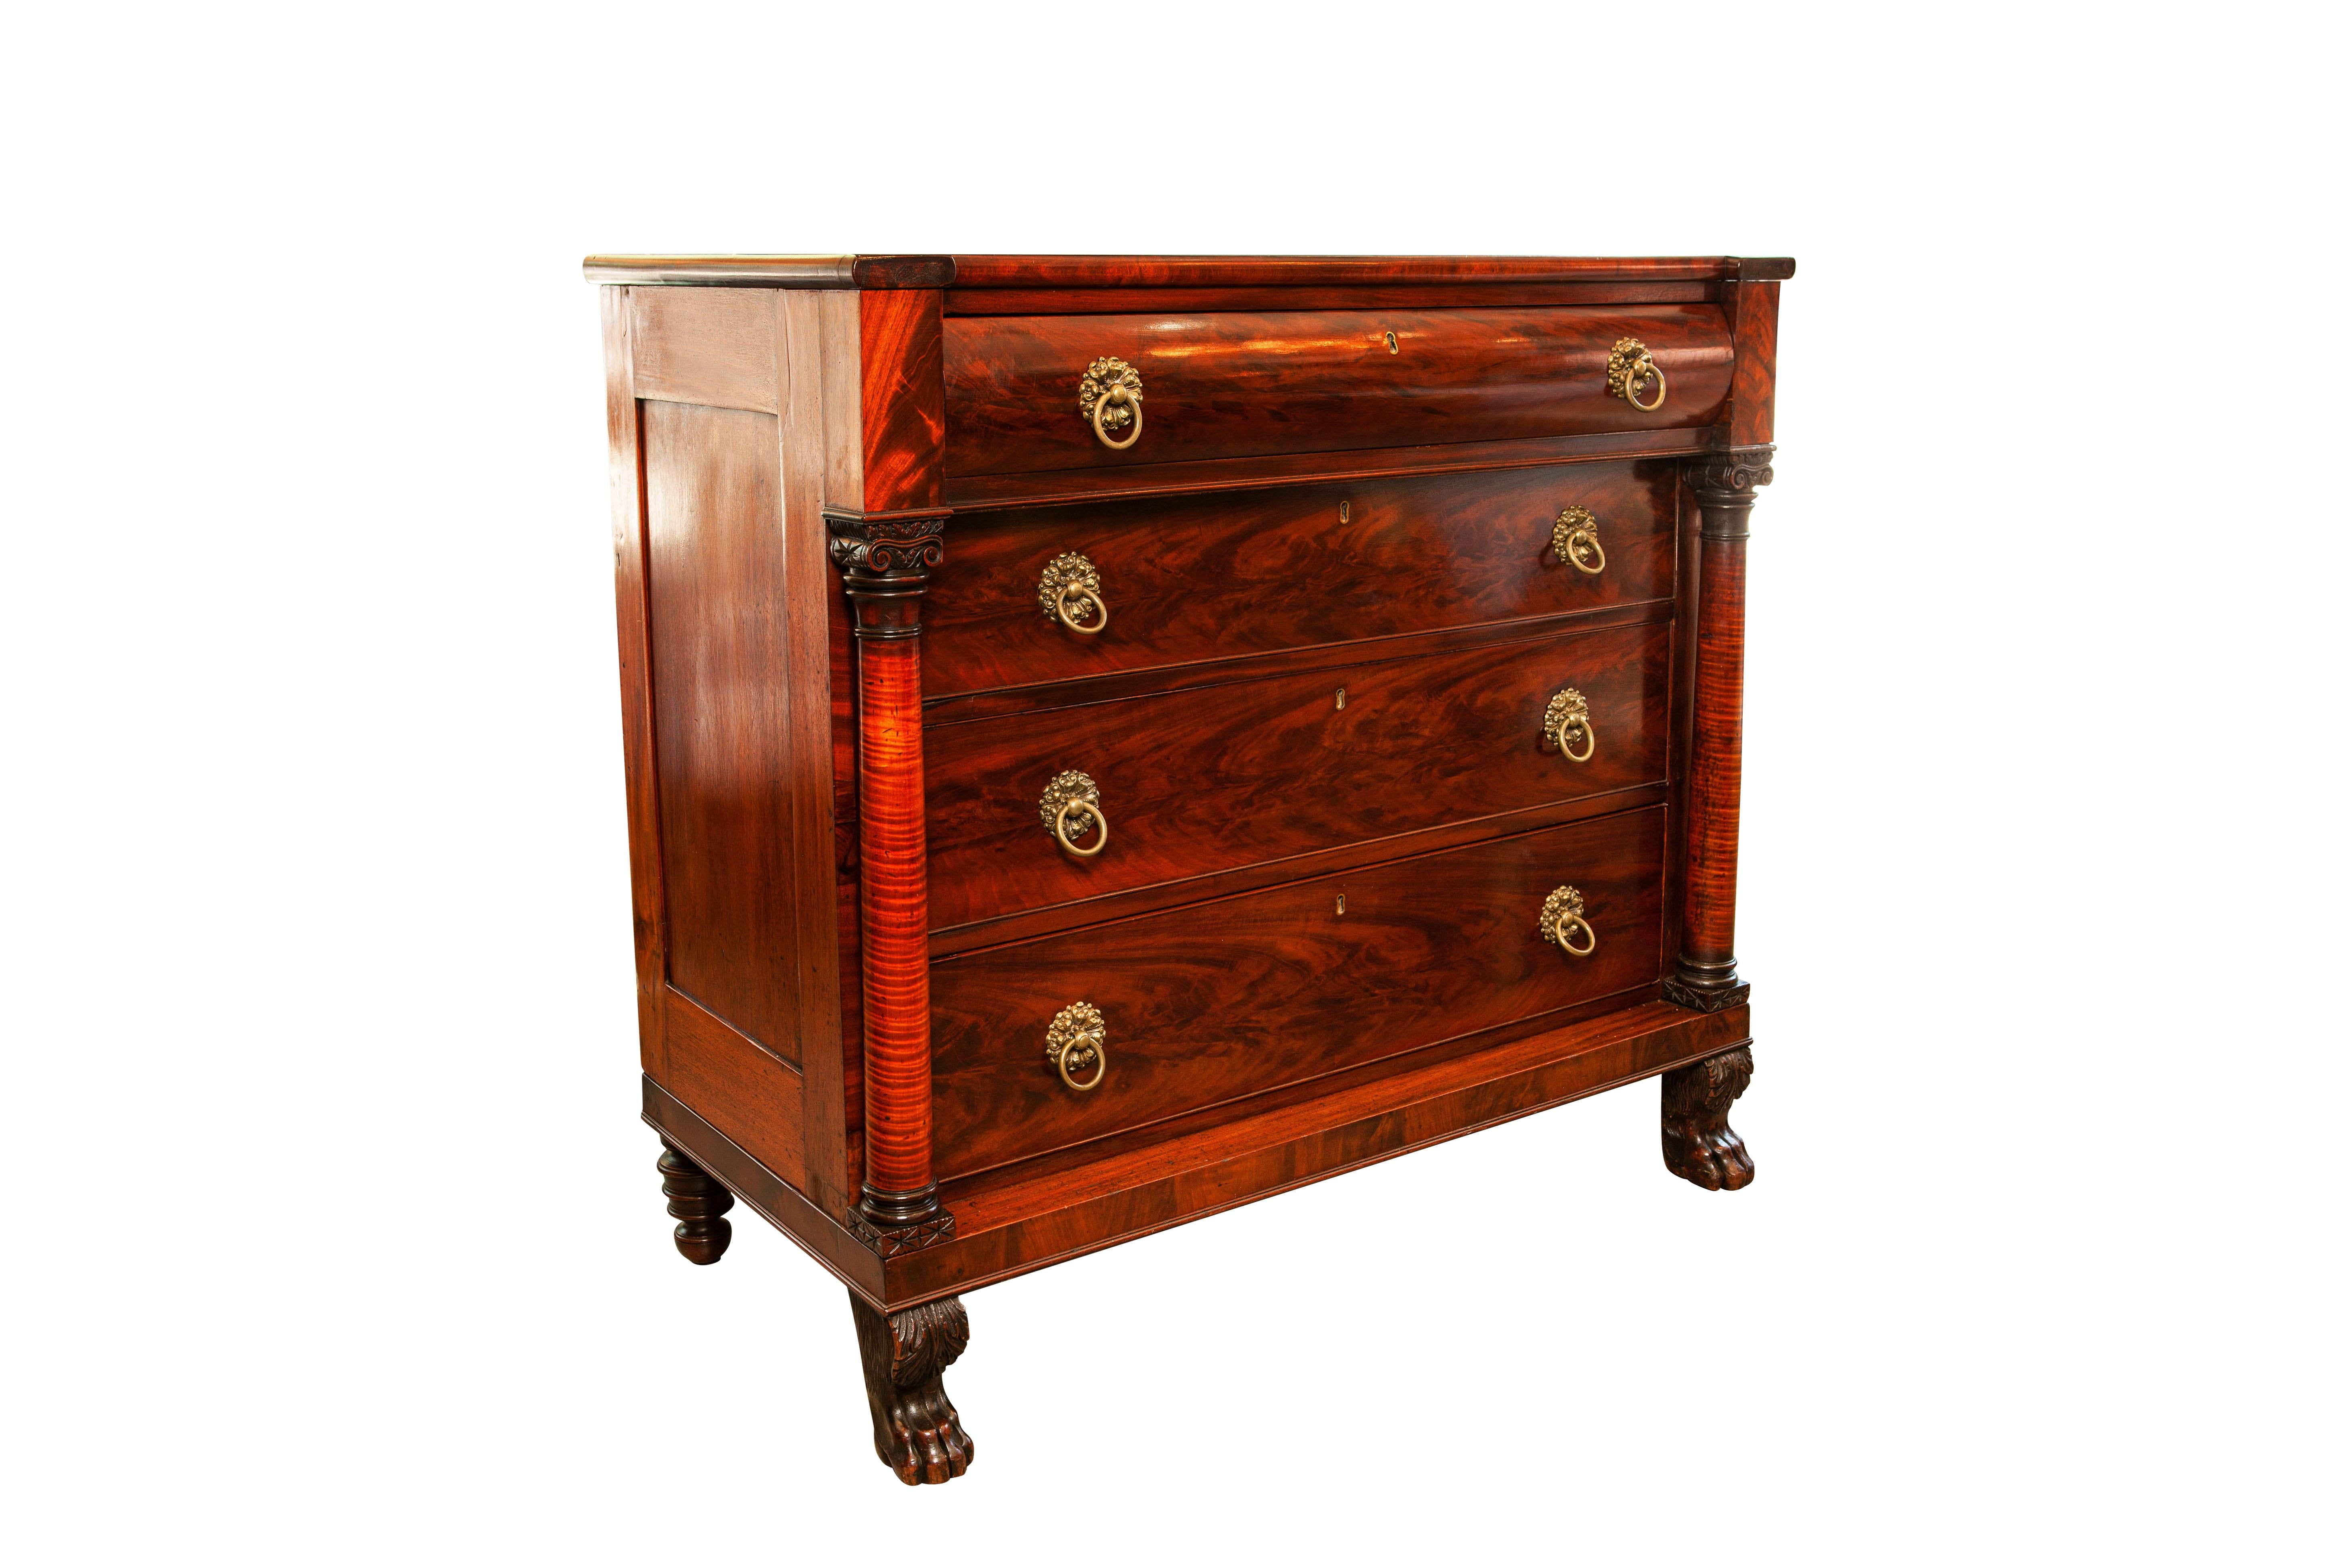 Antique American Empire mahogany wood 4-drawer chest with claw feet and original brass pulls ( circa 1800s-1840s) newly polished.